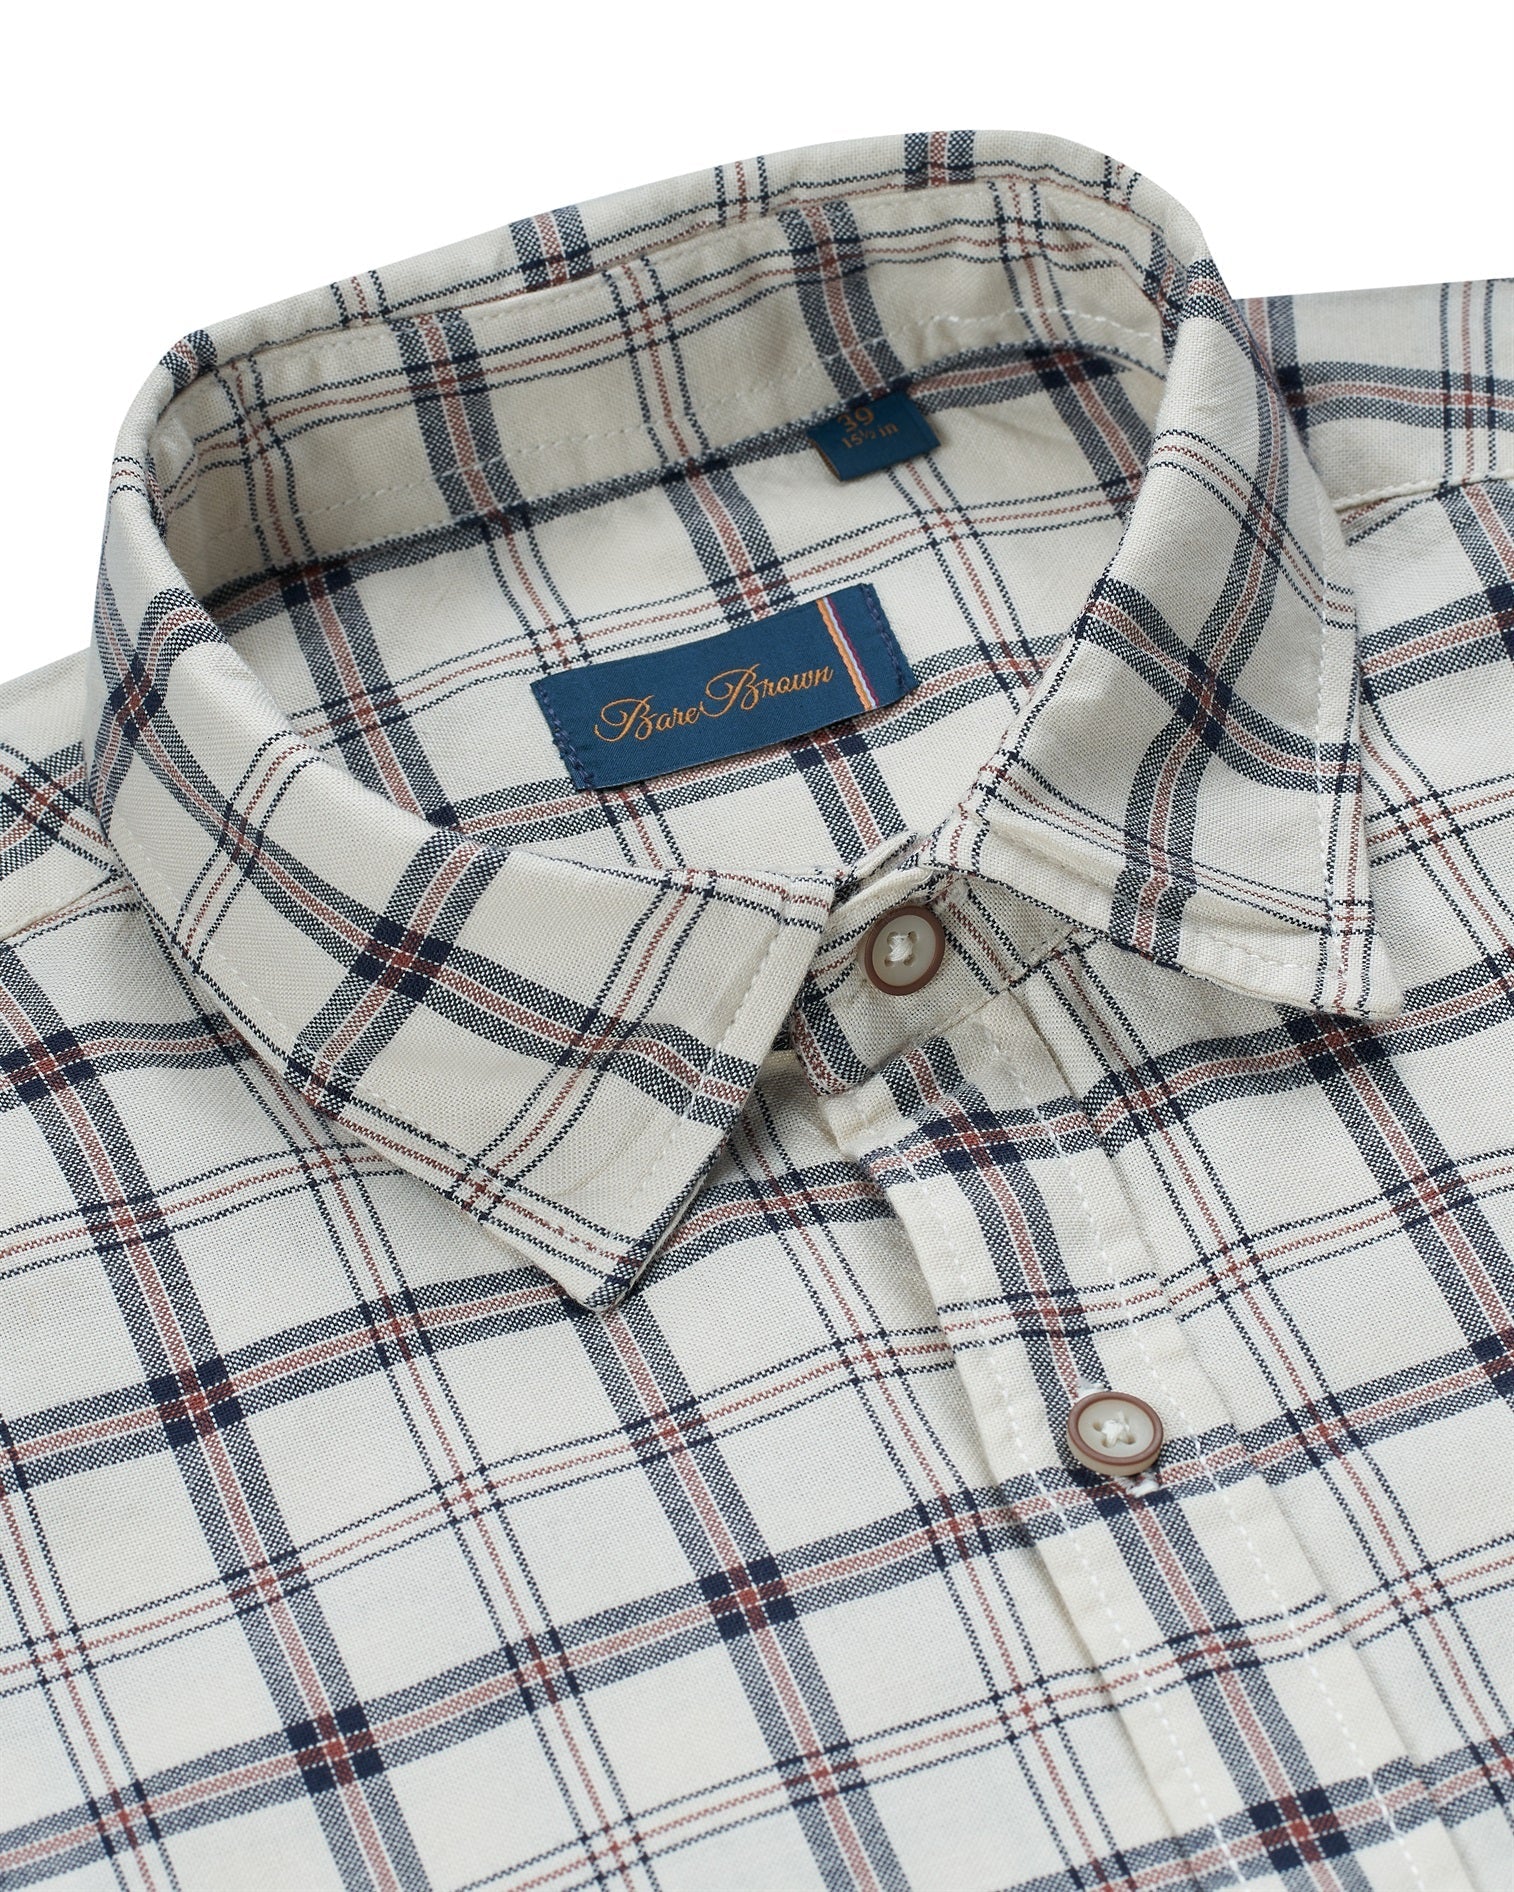 Bare Brown Cotton Check Shirt, Slim Fit with Full Sleeves - Off White